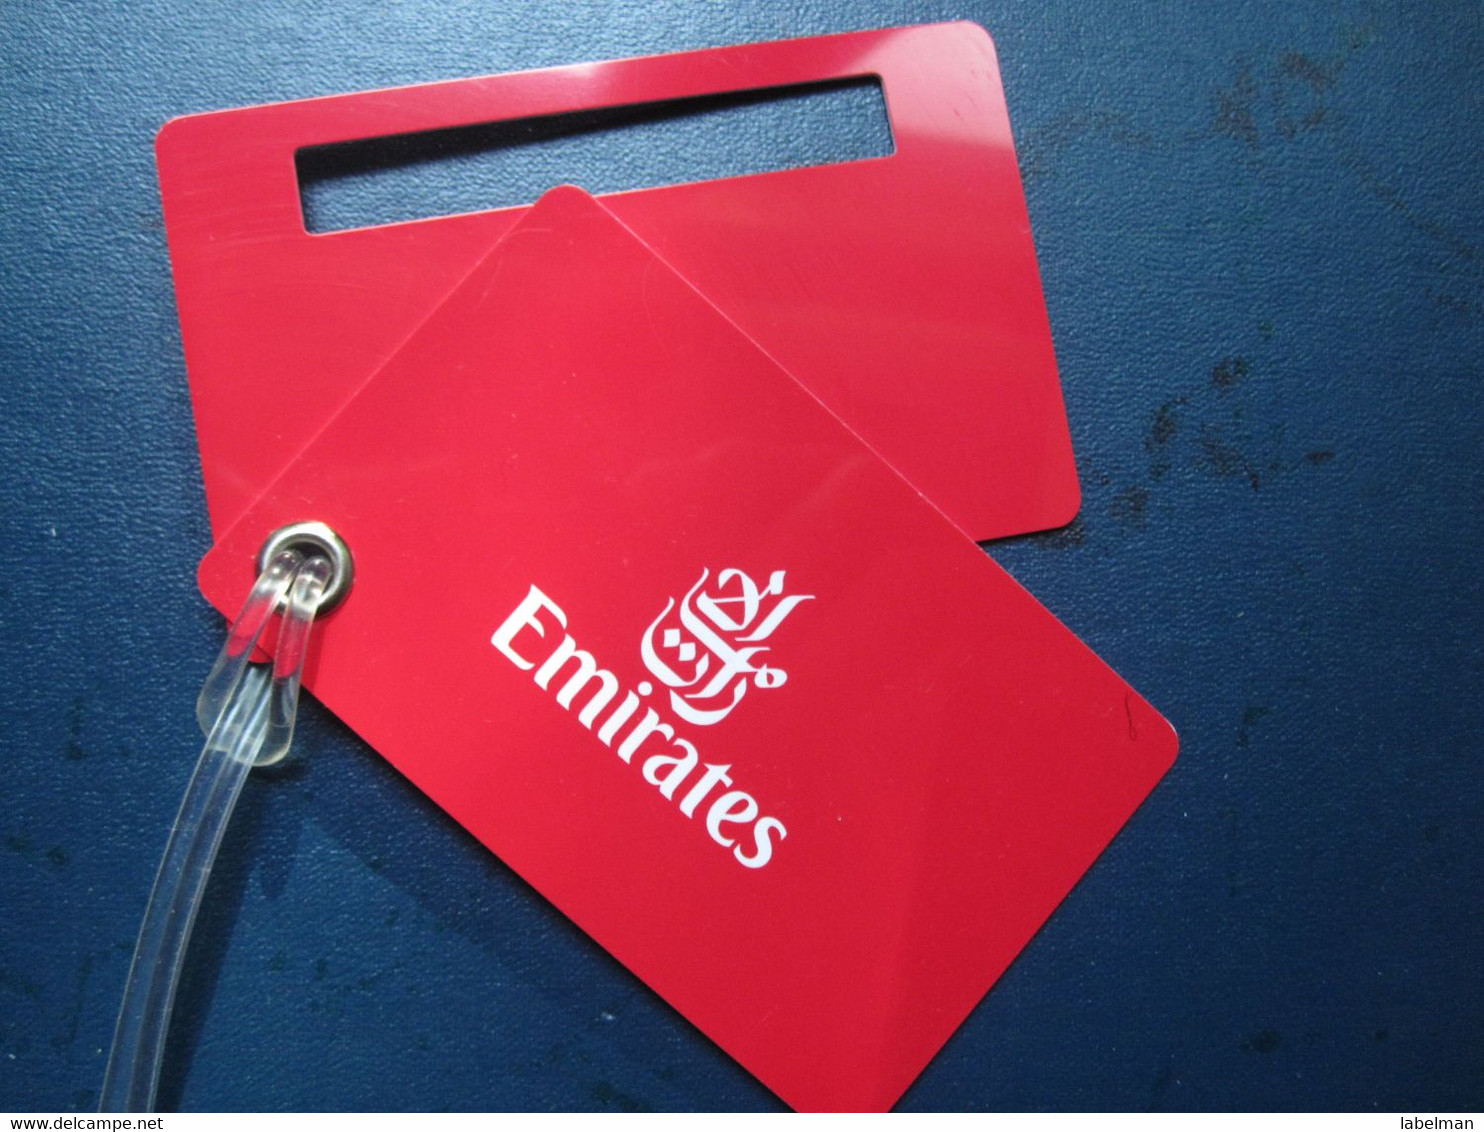 EMIRATES UAE UNITED ARABS CARD WELCOME TICKET AIRWAYS AIRLINE STICKER LABEL TAG LUGGAGE BUGGAGE PLANE AIRCRAFT AIRPORT - World